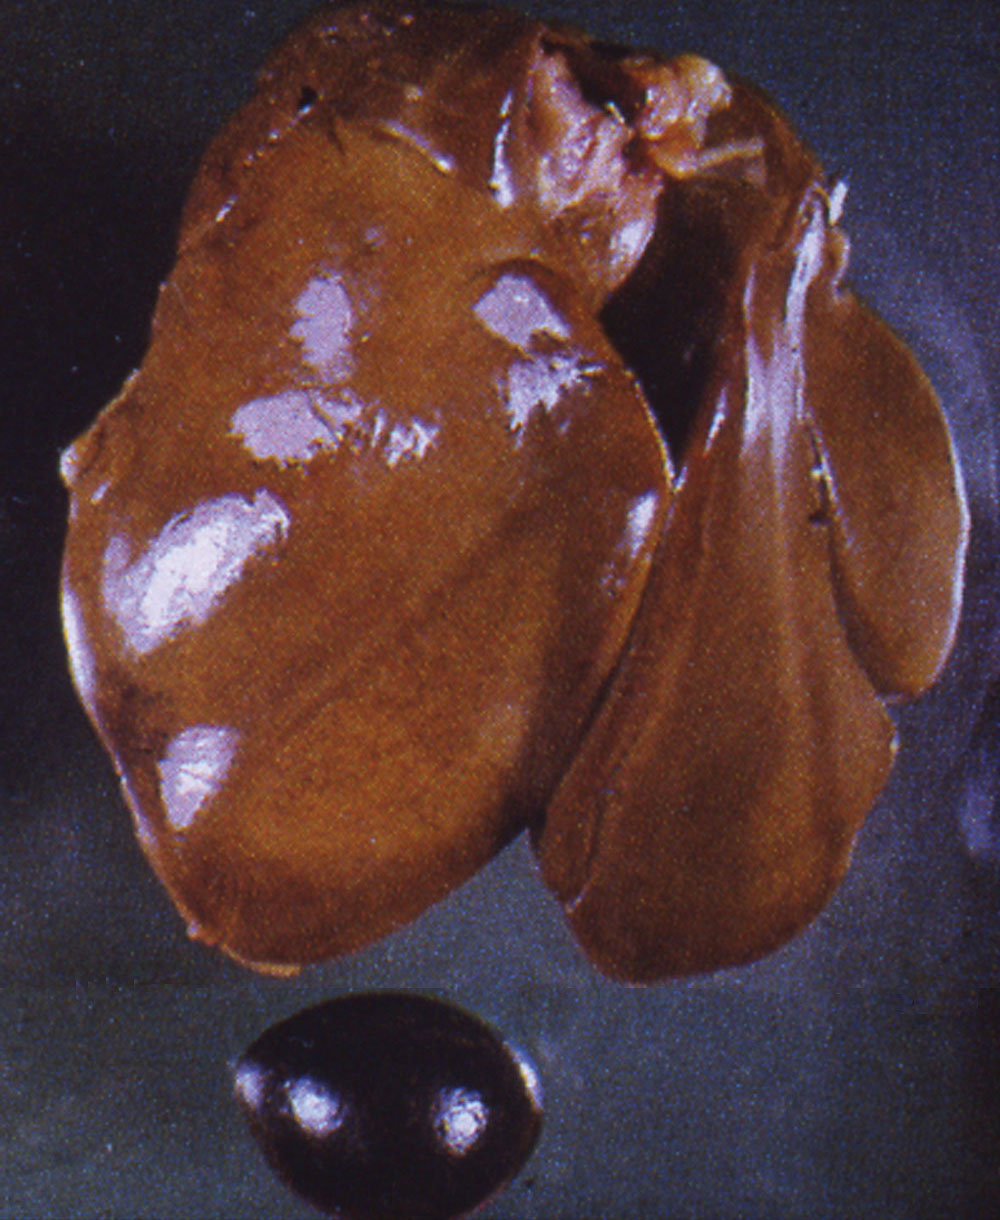 fowl-typhoid: Avian liver, spleen. Liver is pale with diffuse yellow-brown (bronze) discoloration; splenic congestion and enlargement.